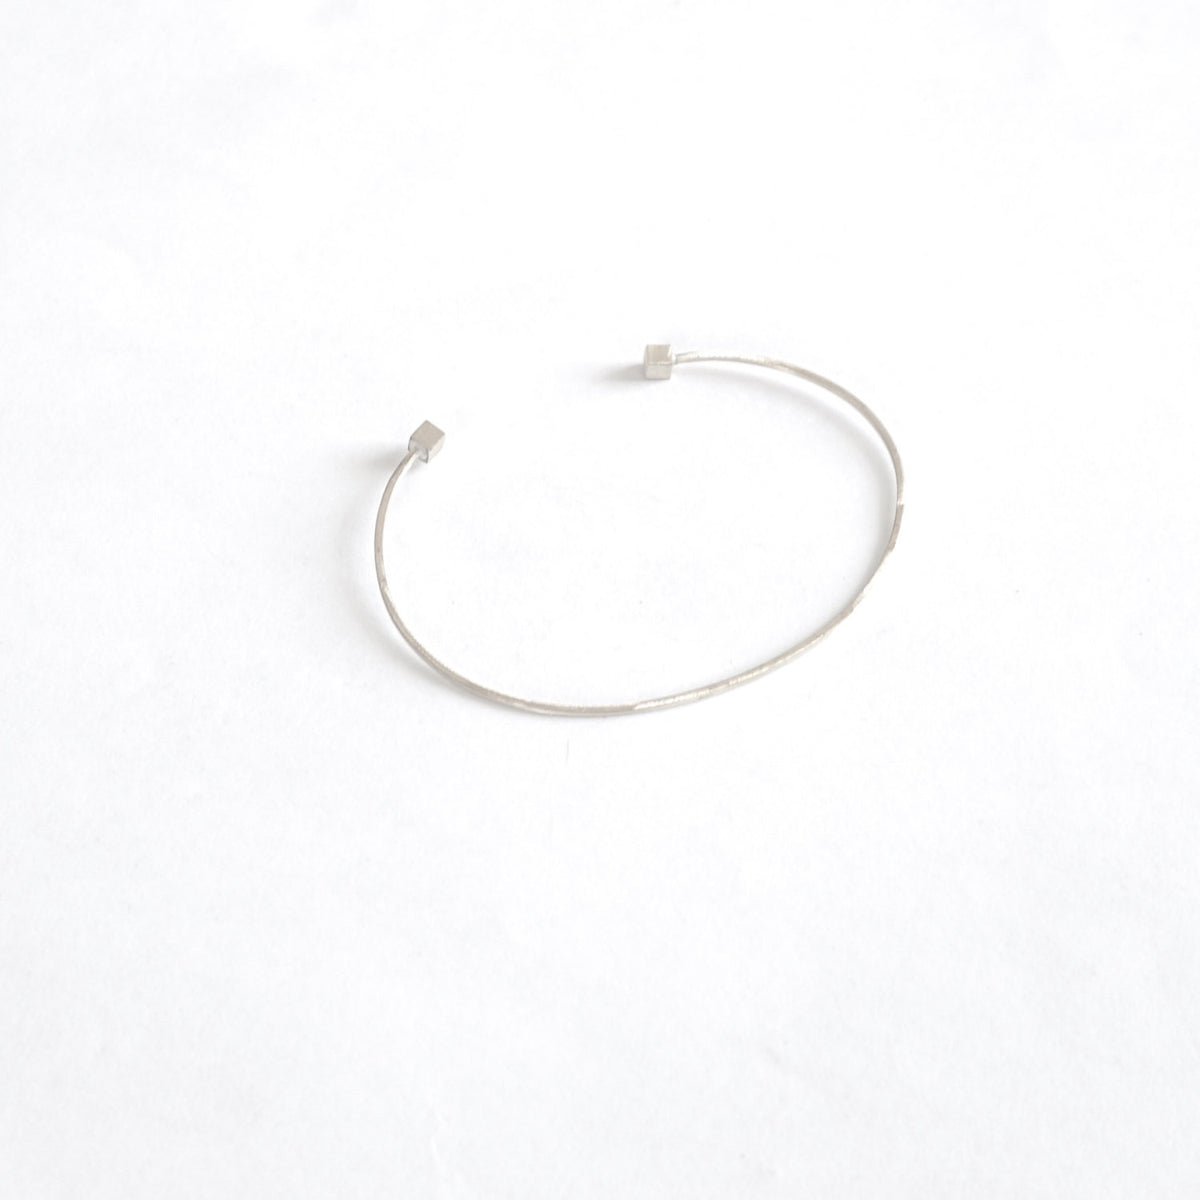 Simple Yet Elegant, Hand-Made Open Cuff Bangle Bracelet With Double Cube Ends - 0207 - Virginia Wynne Designs